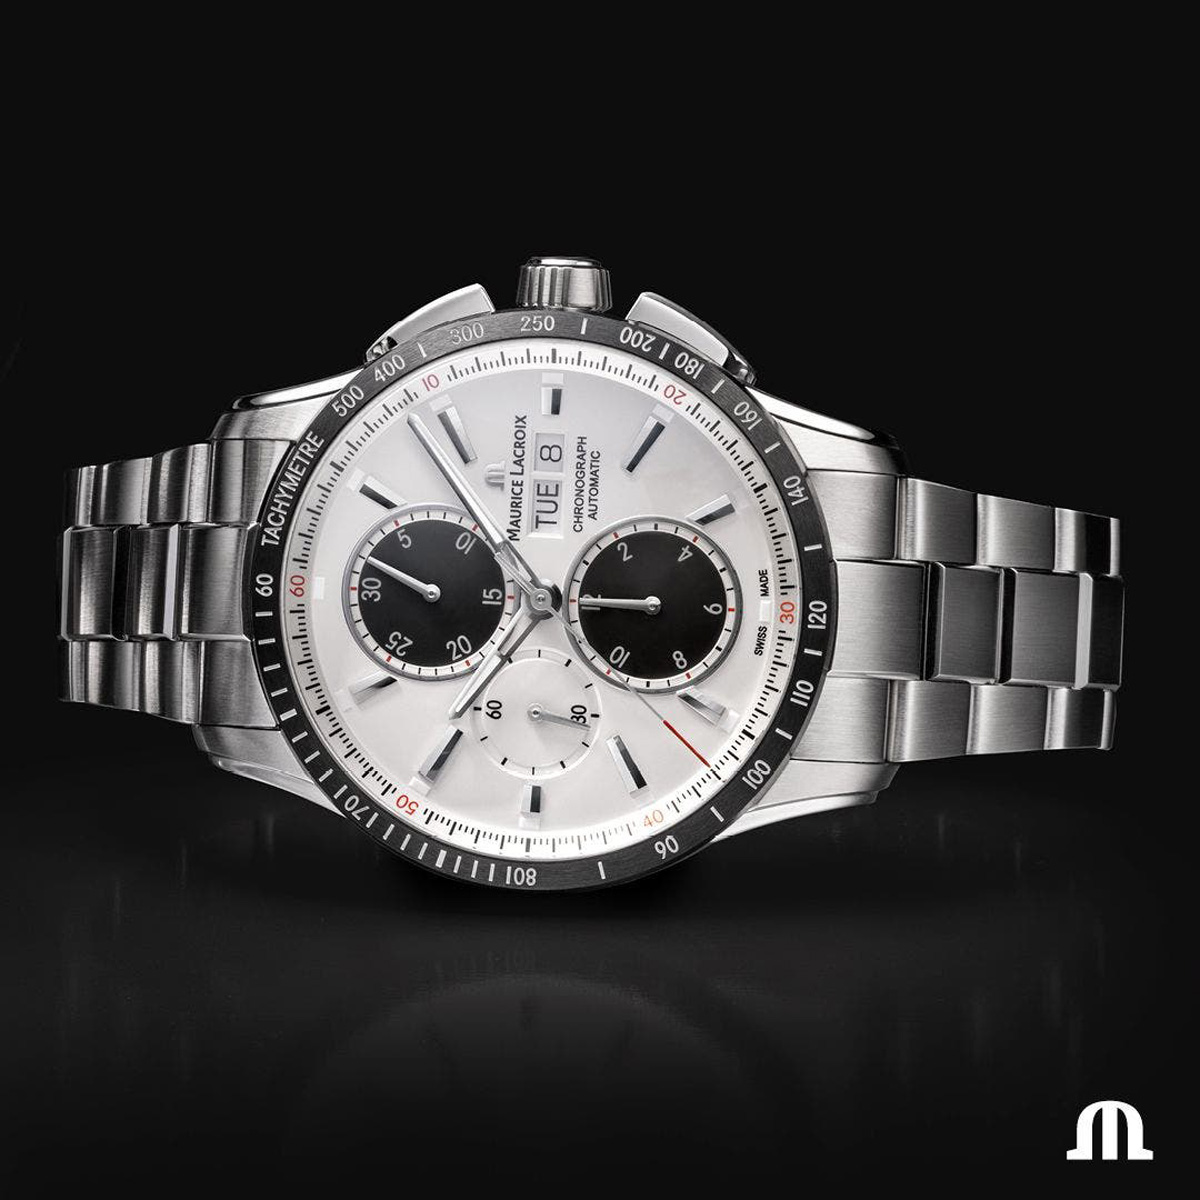 S White/Black Dial Chicago York | Maurice New Jewelers Stainless Lacroix Pontos Chronograph Band